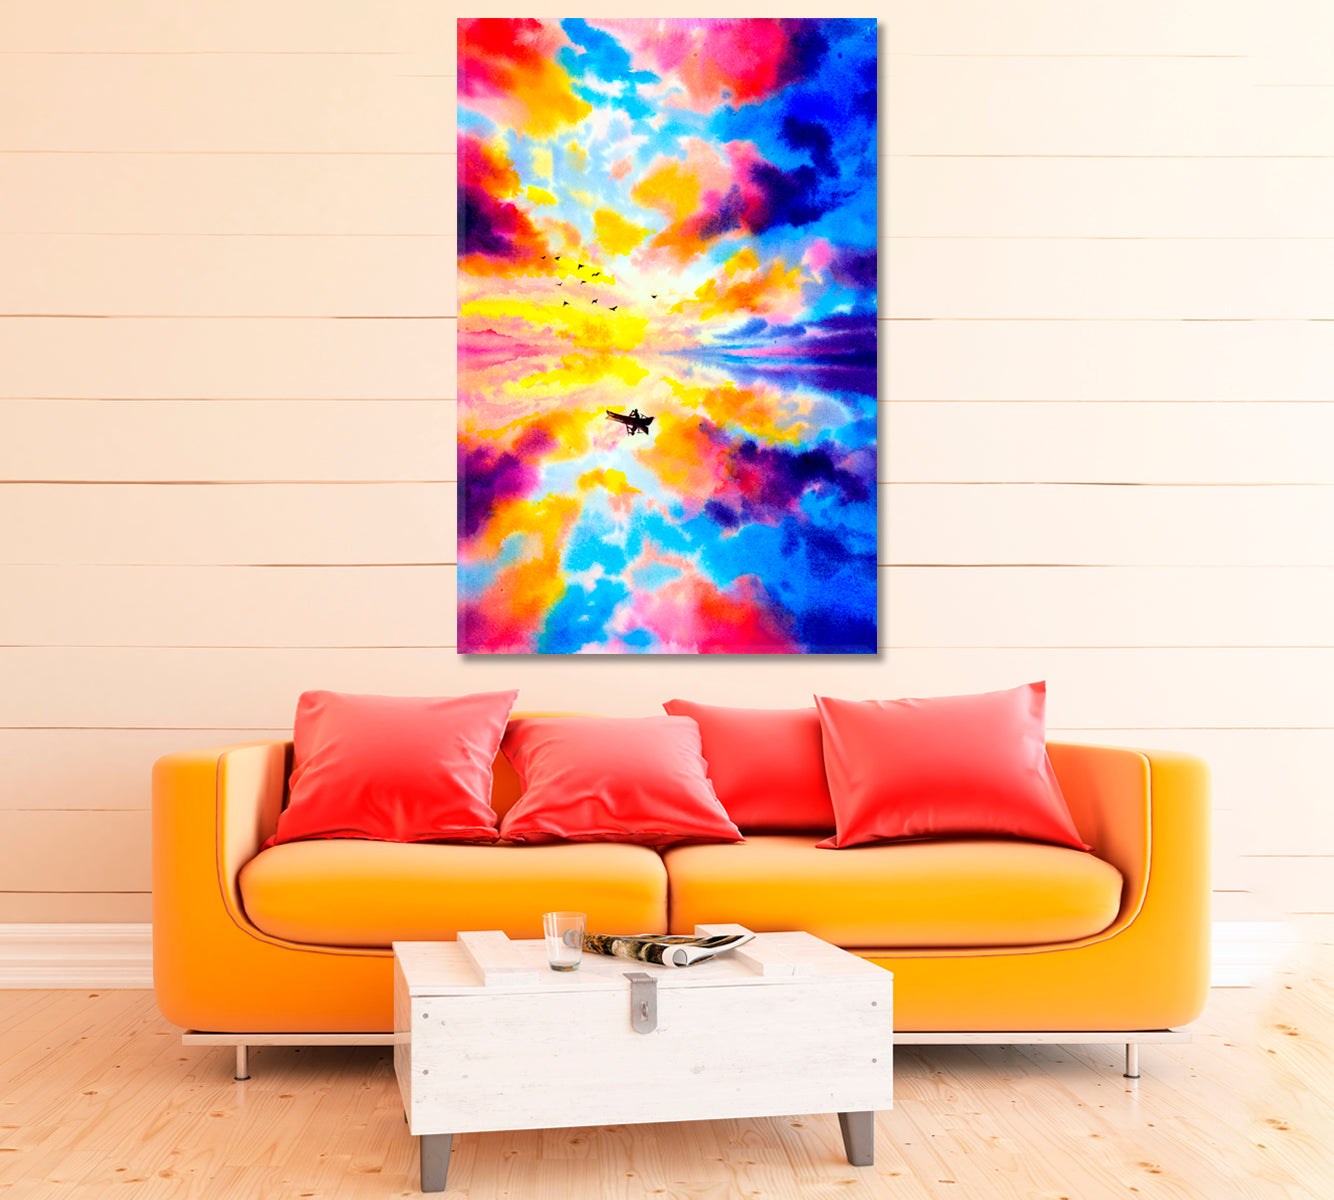 Lake and Colorful Sky with Clouds Canvas Print ArtLexy 1 Panel 16"x24" inches 